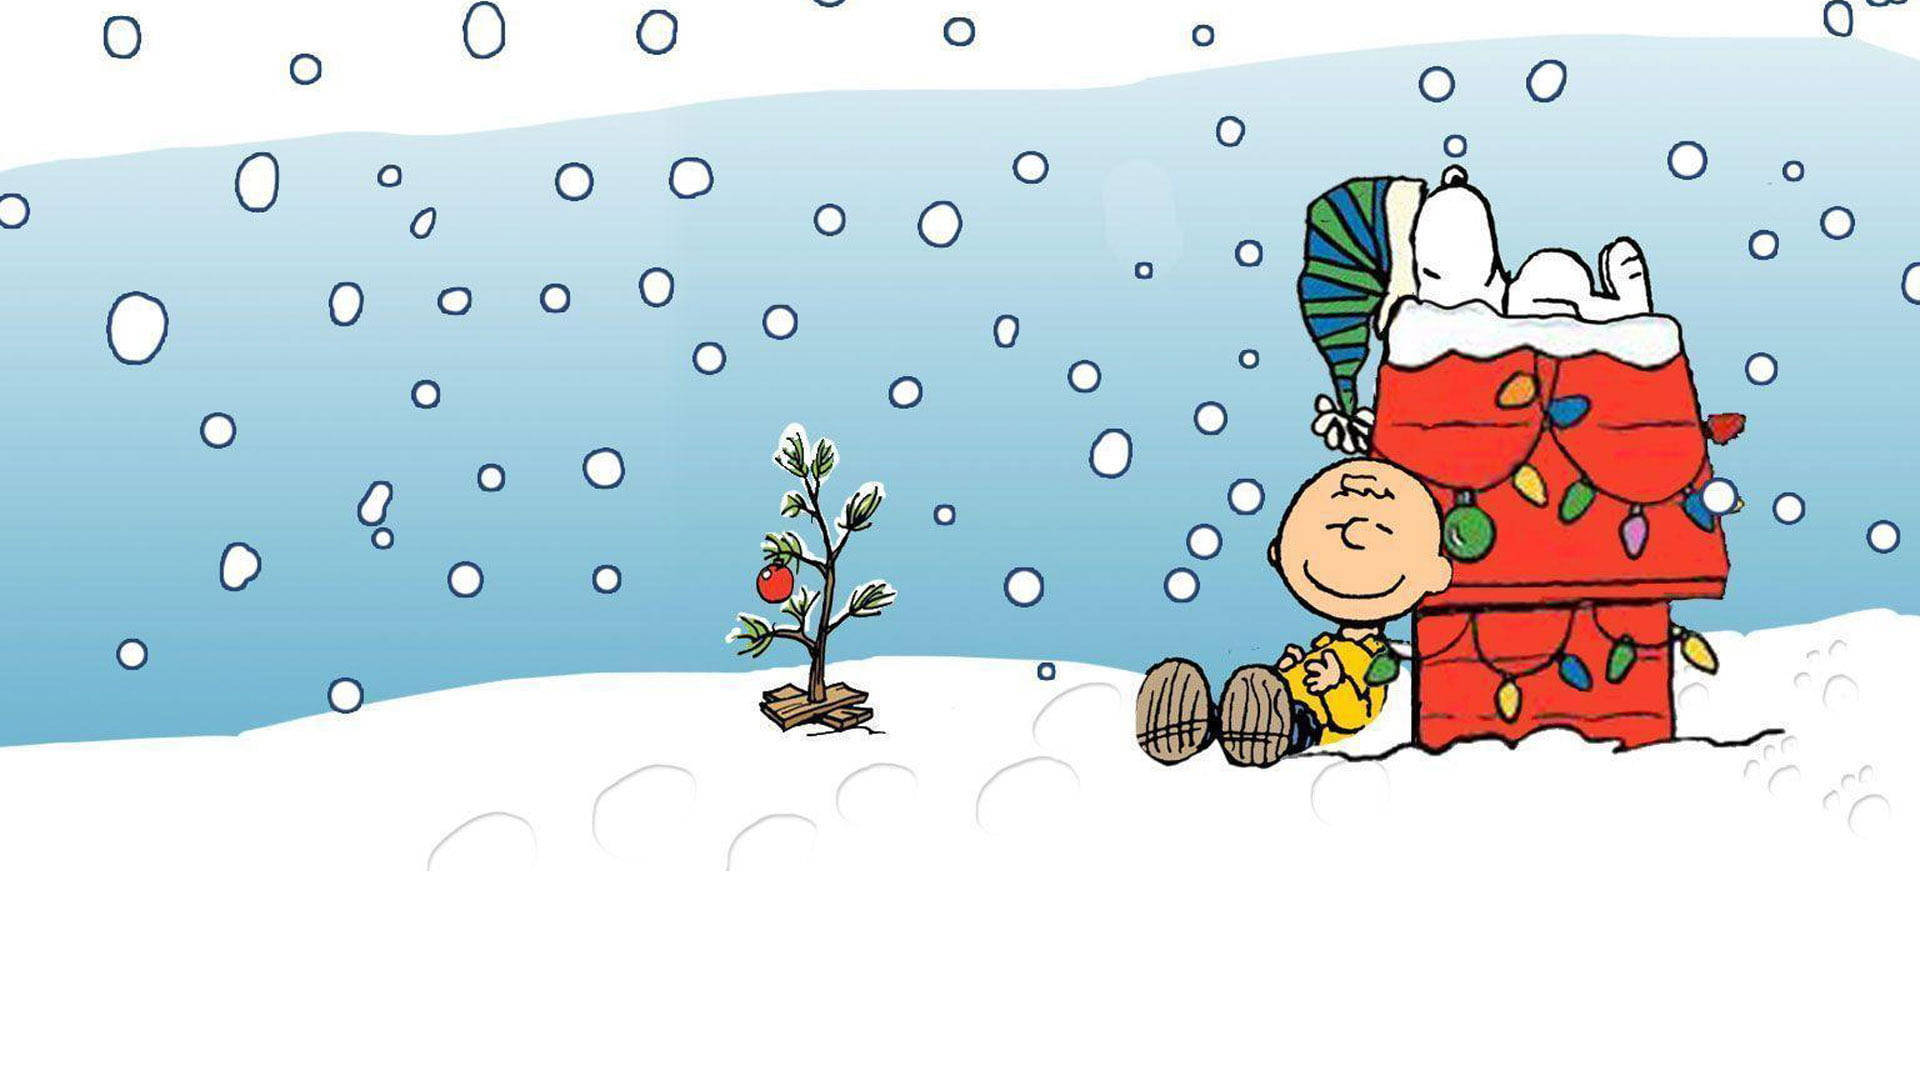 Celebrate the joys of Christmas with Snoopy and an iPhone! Wallpaper